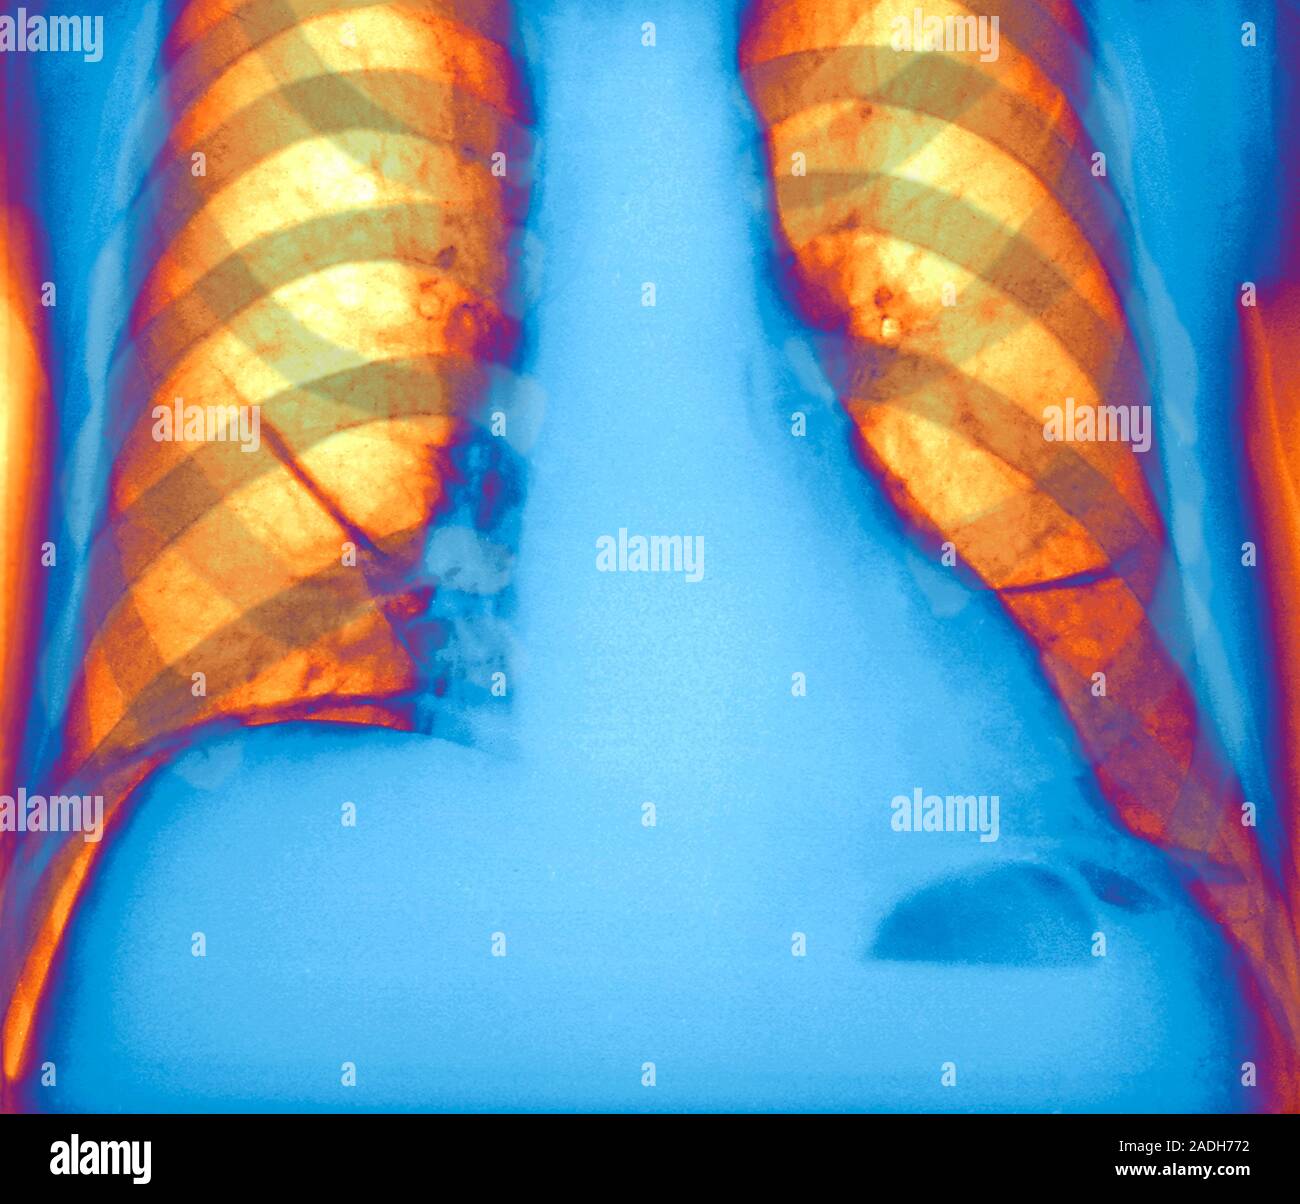 Collapsed lung, coloured X-ray. Collapsed left lung (right, atelectasis) as a result of the abnormal presence of gas (pneumoperitoneum). This gas is s Stock Photo